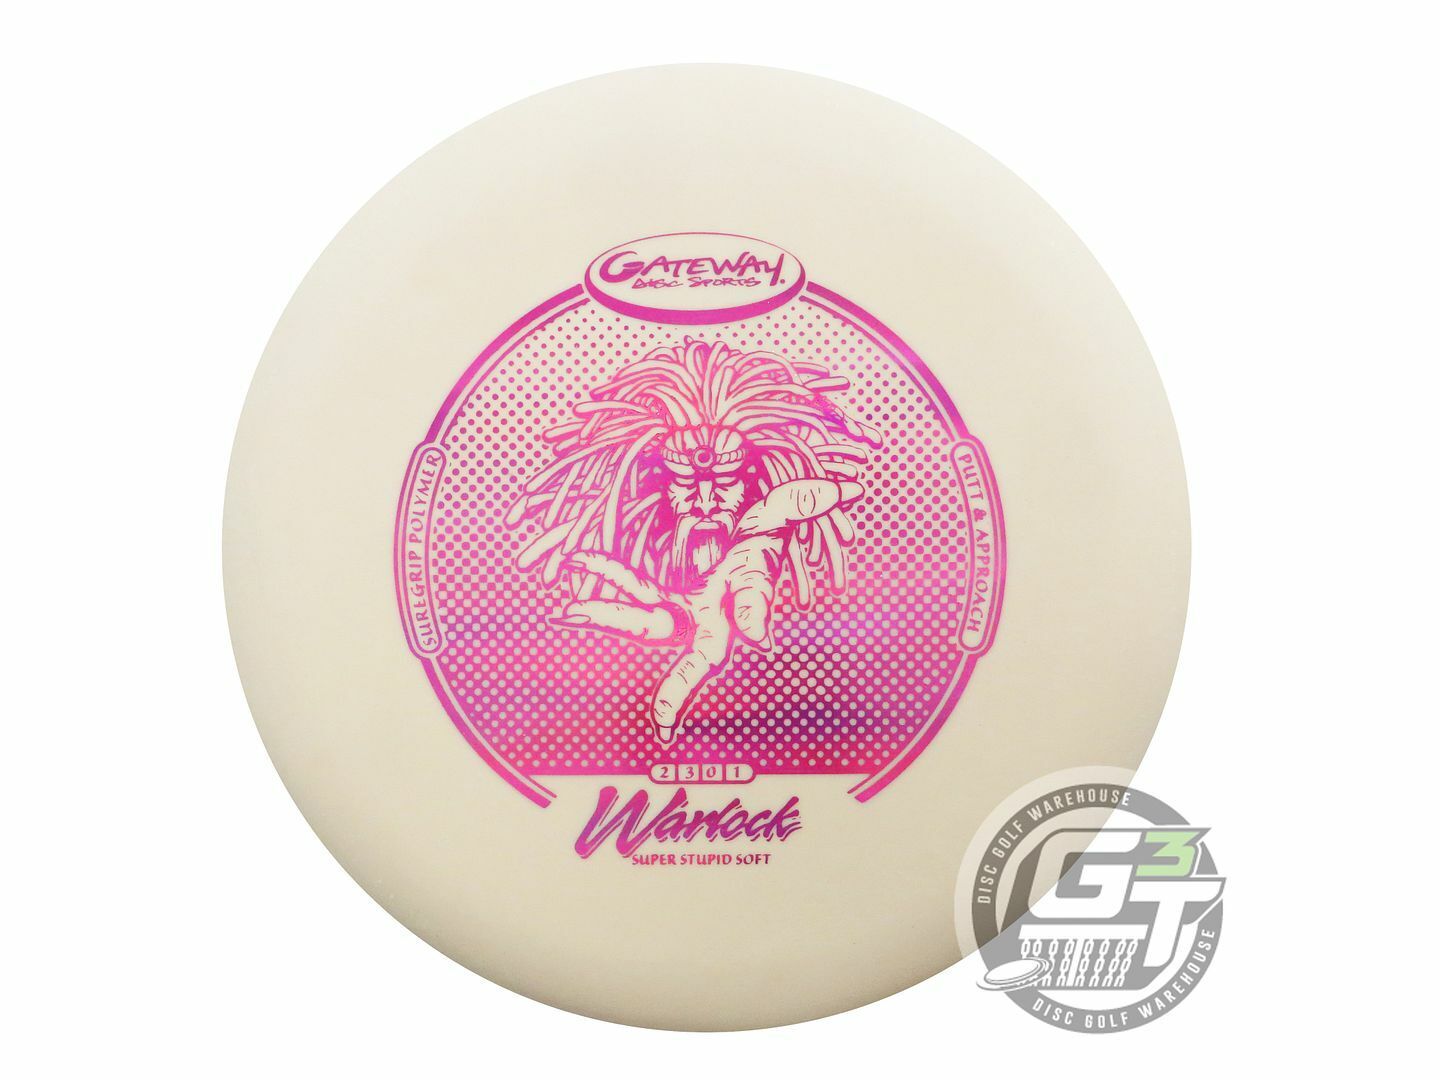 Gateway Sure Grip Super Stupid Soft Warlock Putter Golf Disc (Individually Listed)